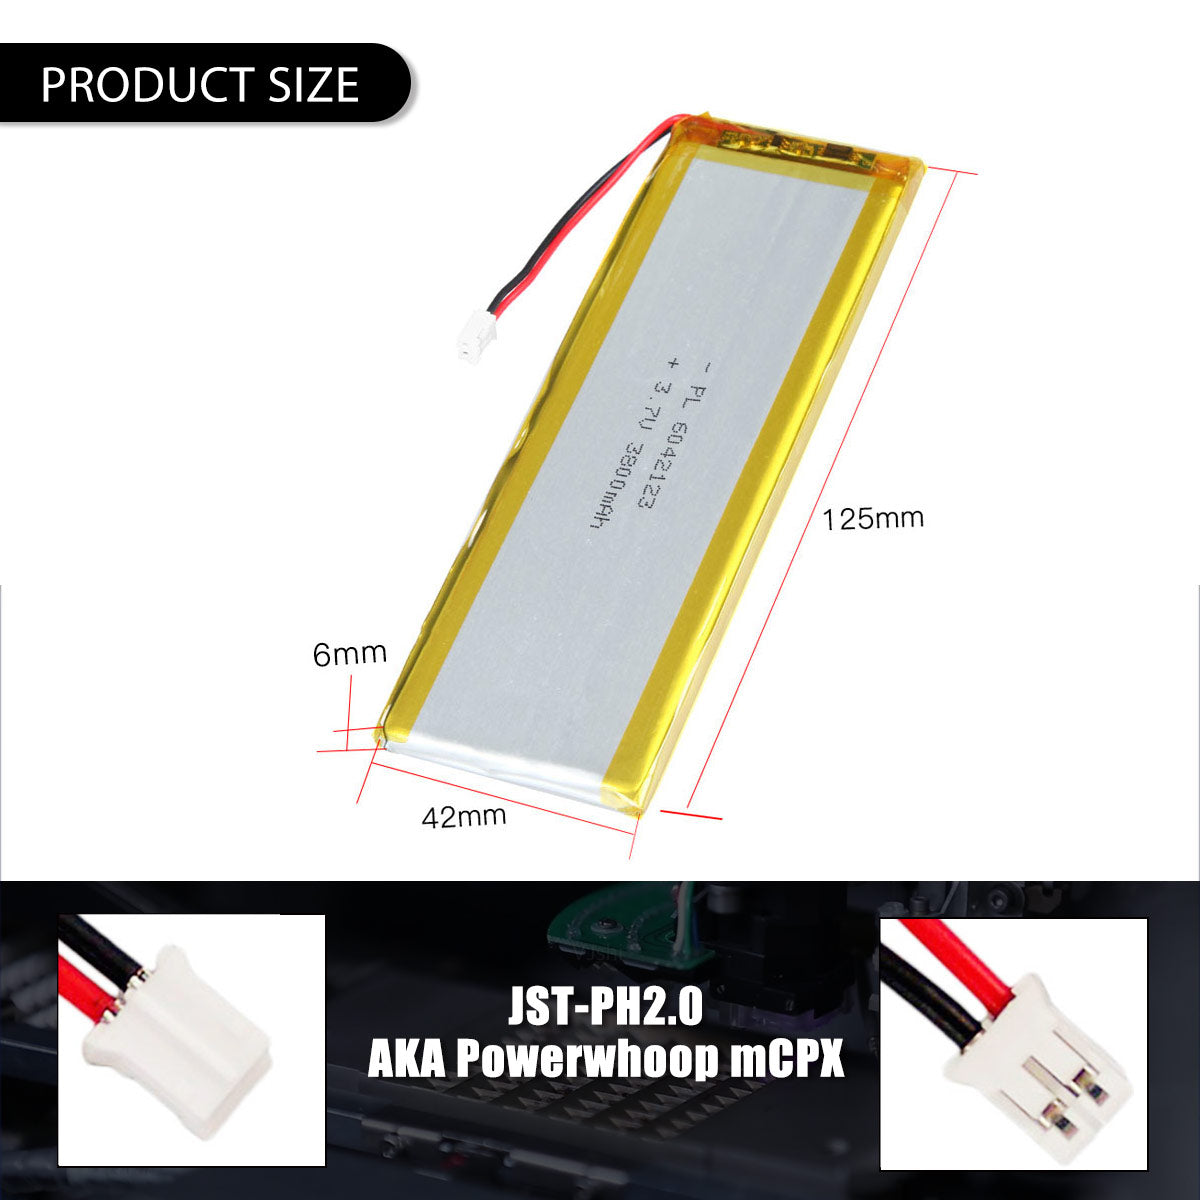 3.7V 3800mAh 6042123 Rechargeable Lithium Polymer Battery